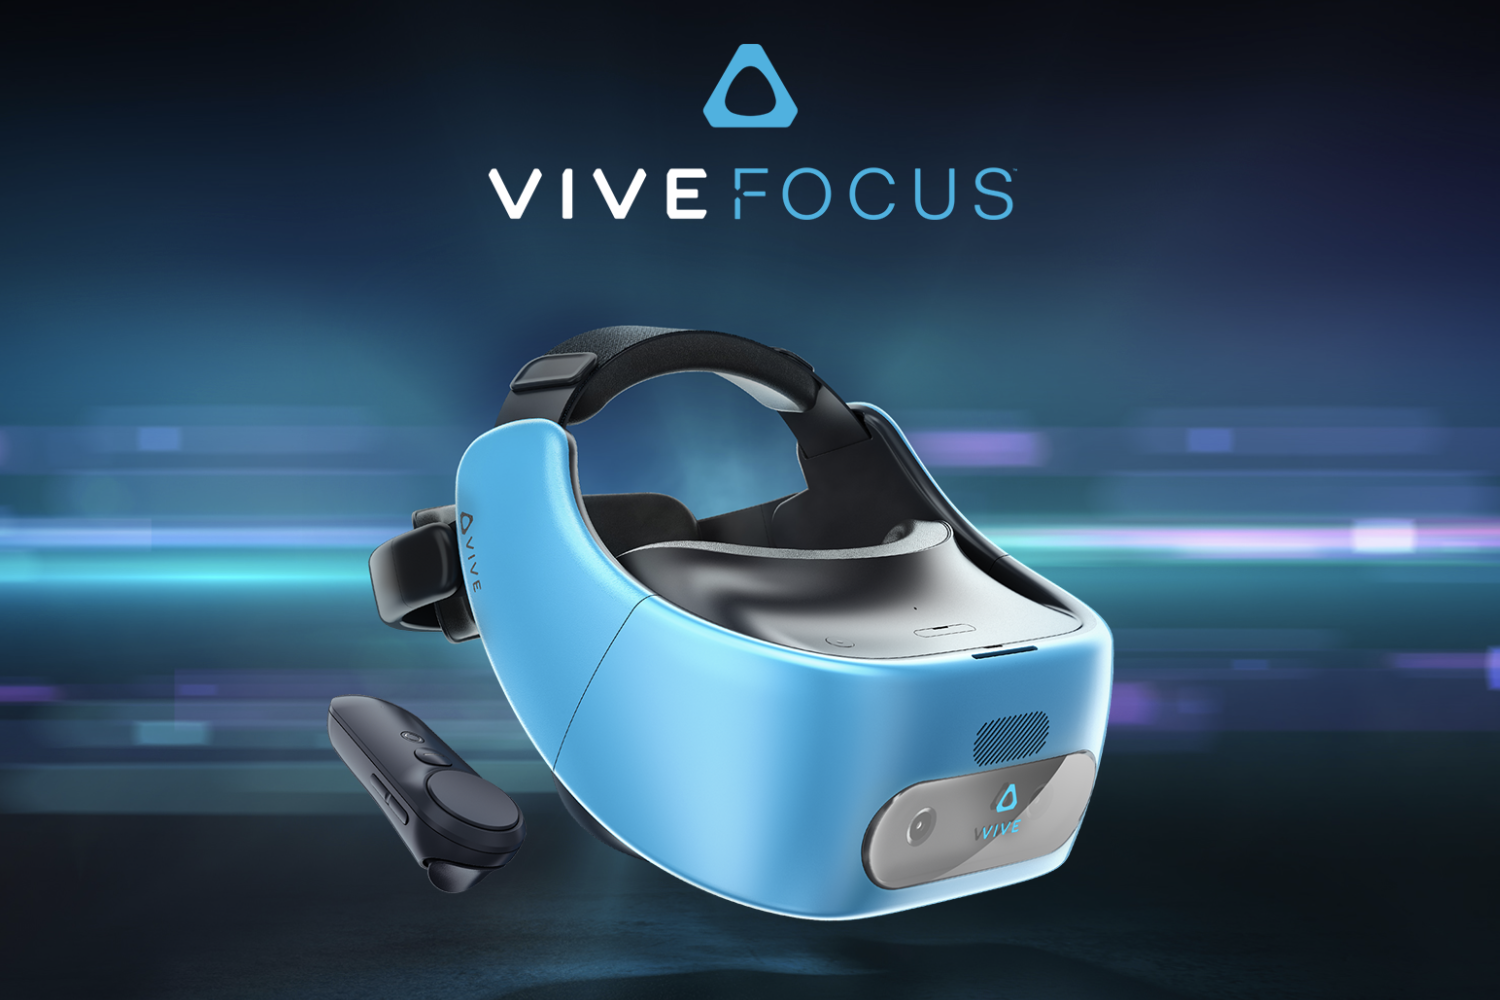 HTC’s standalone virtual reality headset named the Vive Focus.